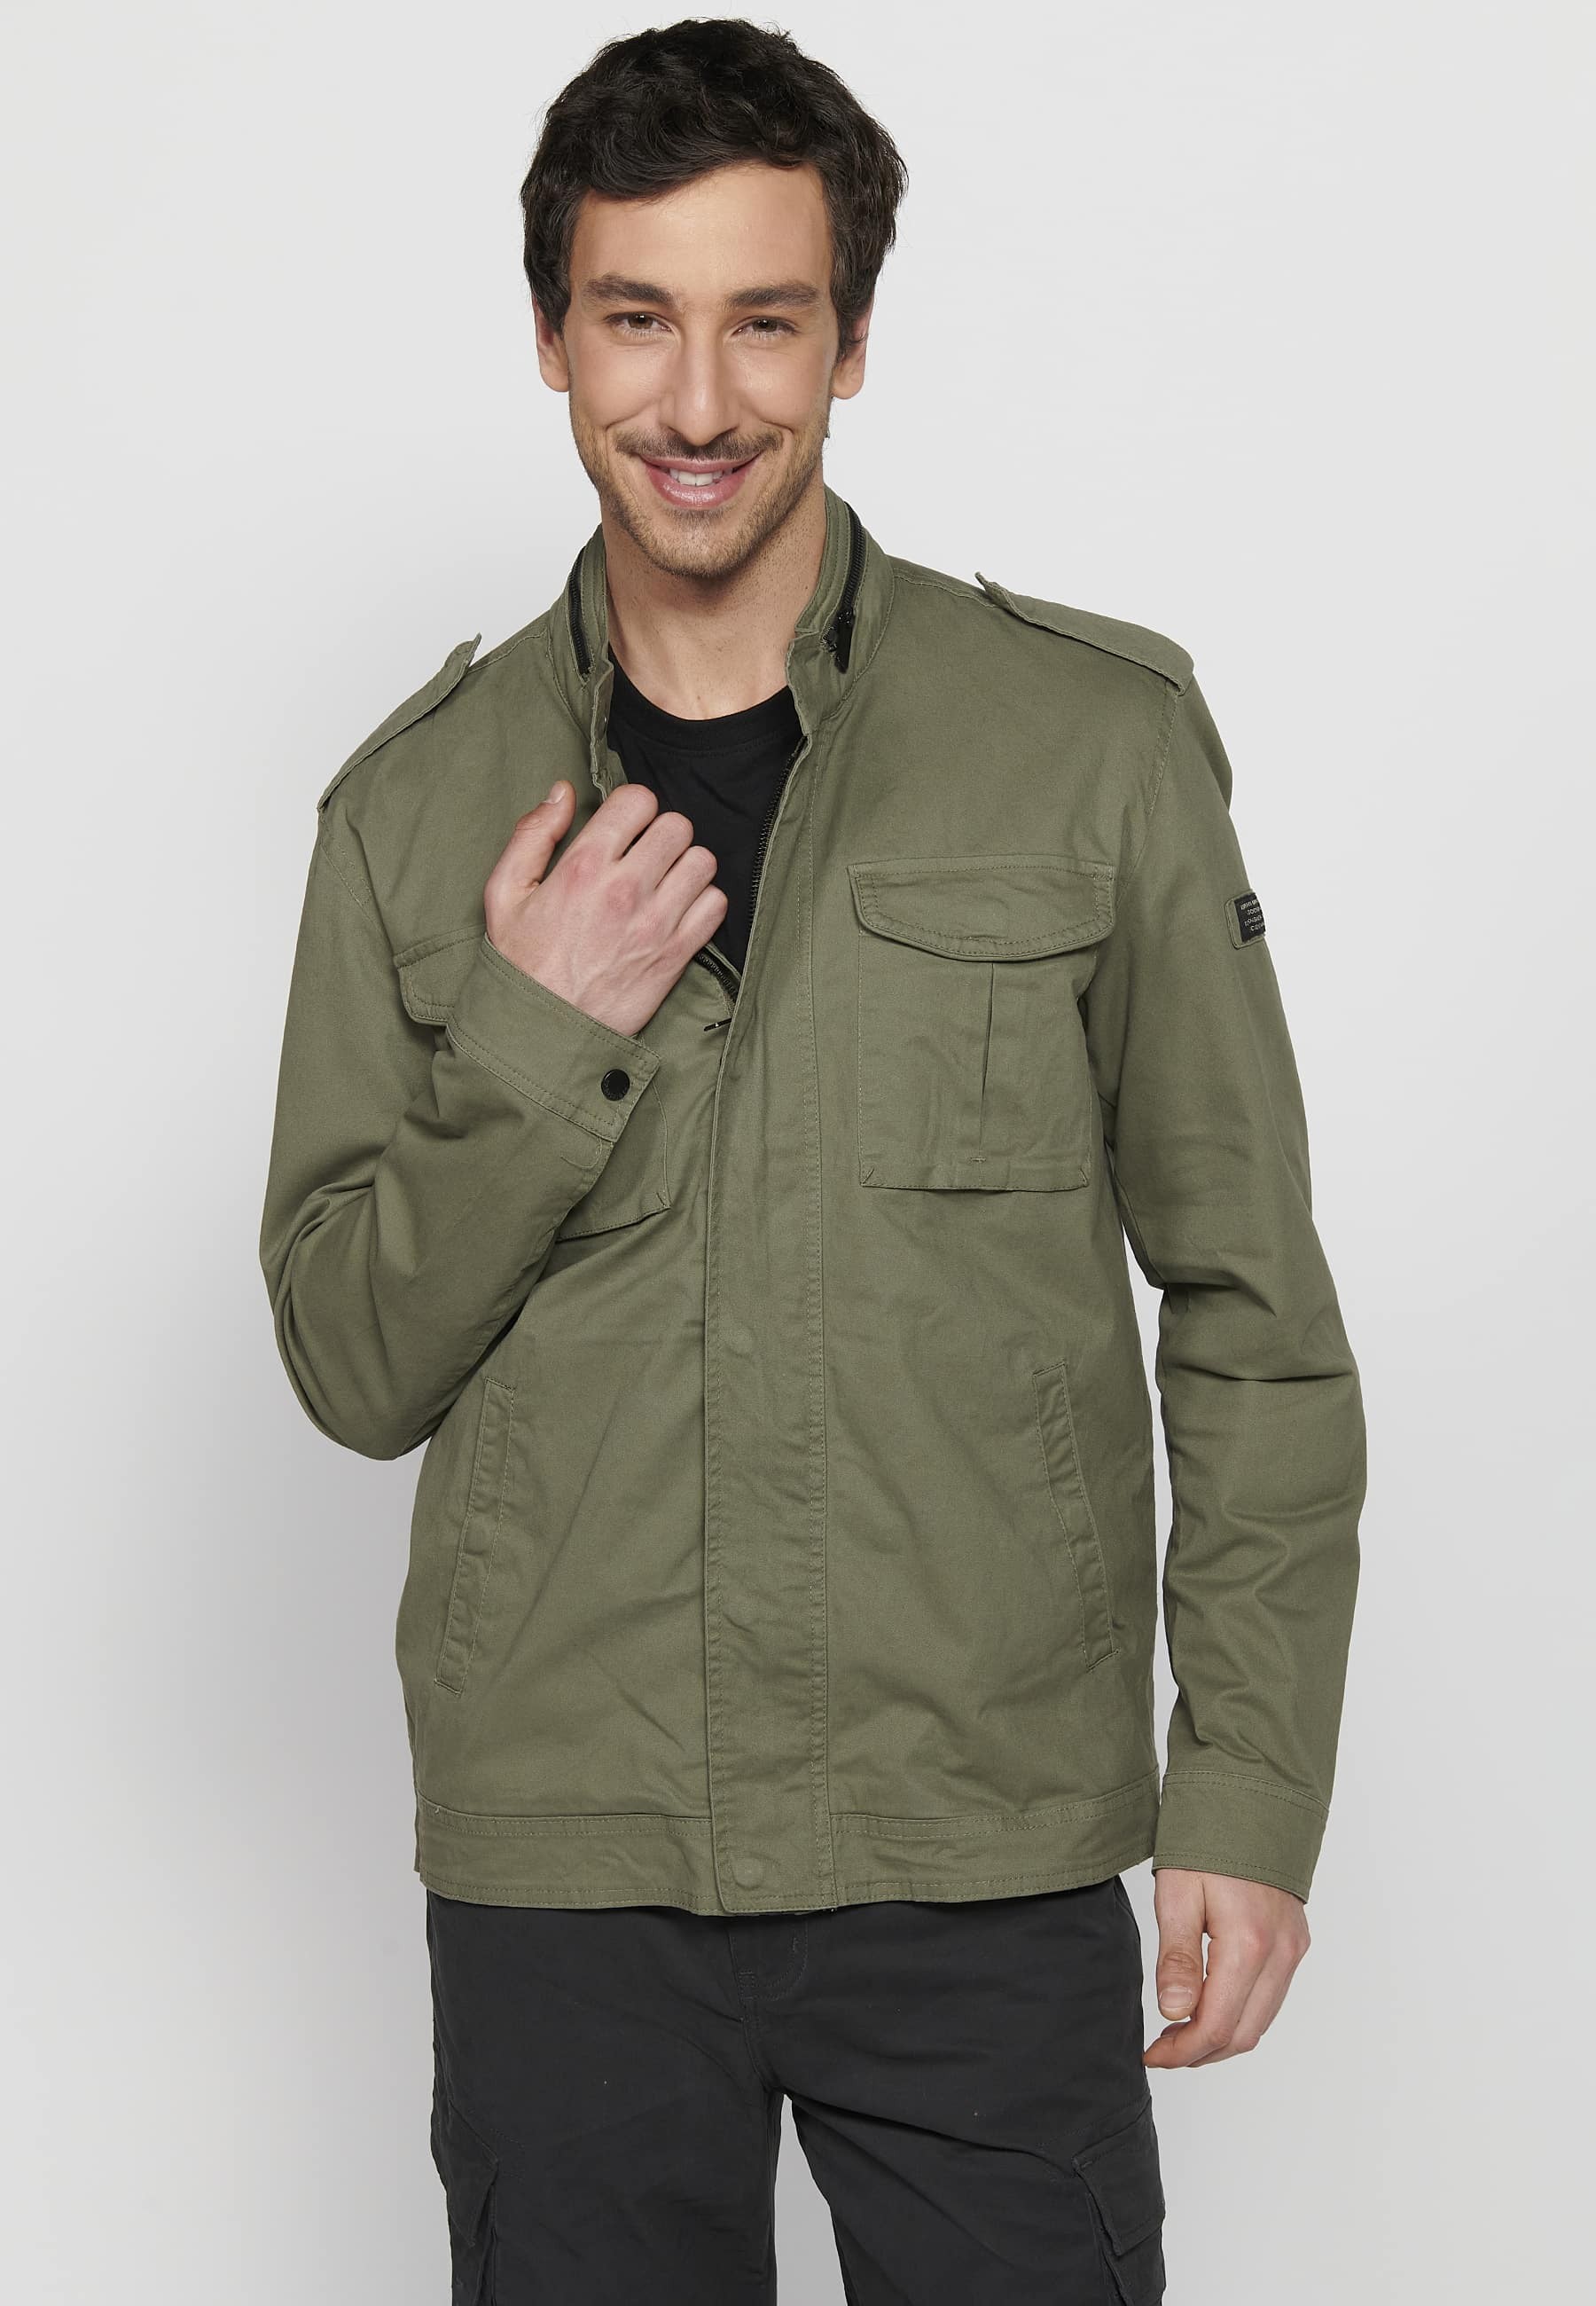 Long Sleeve Jacket with High Neck and Front Zipper Closure with Green Pockets for Men 8